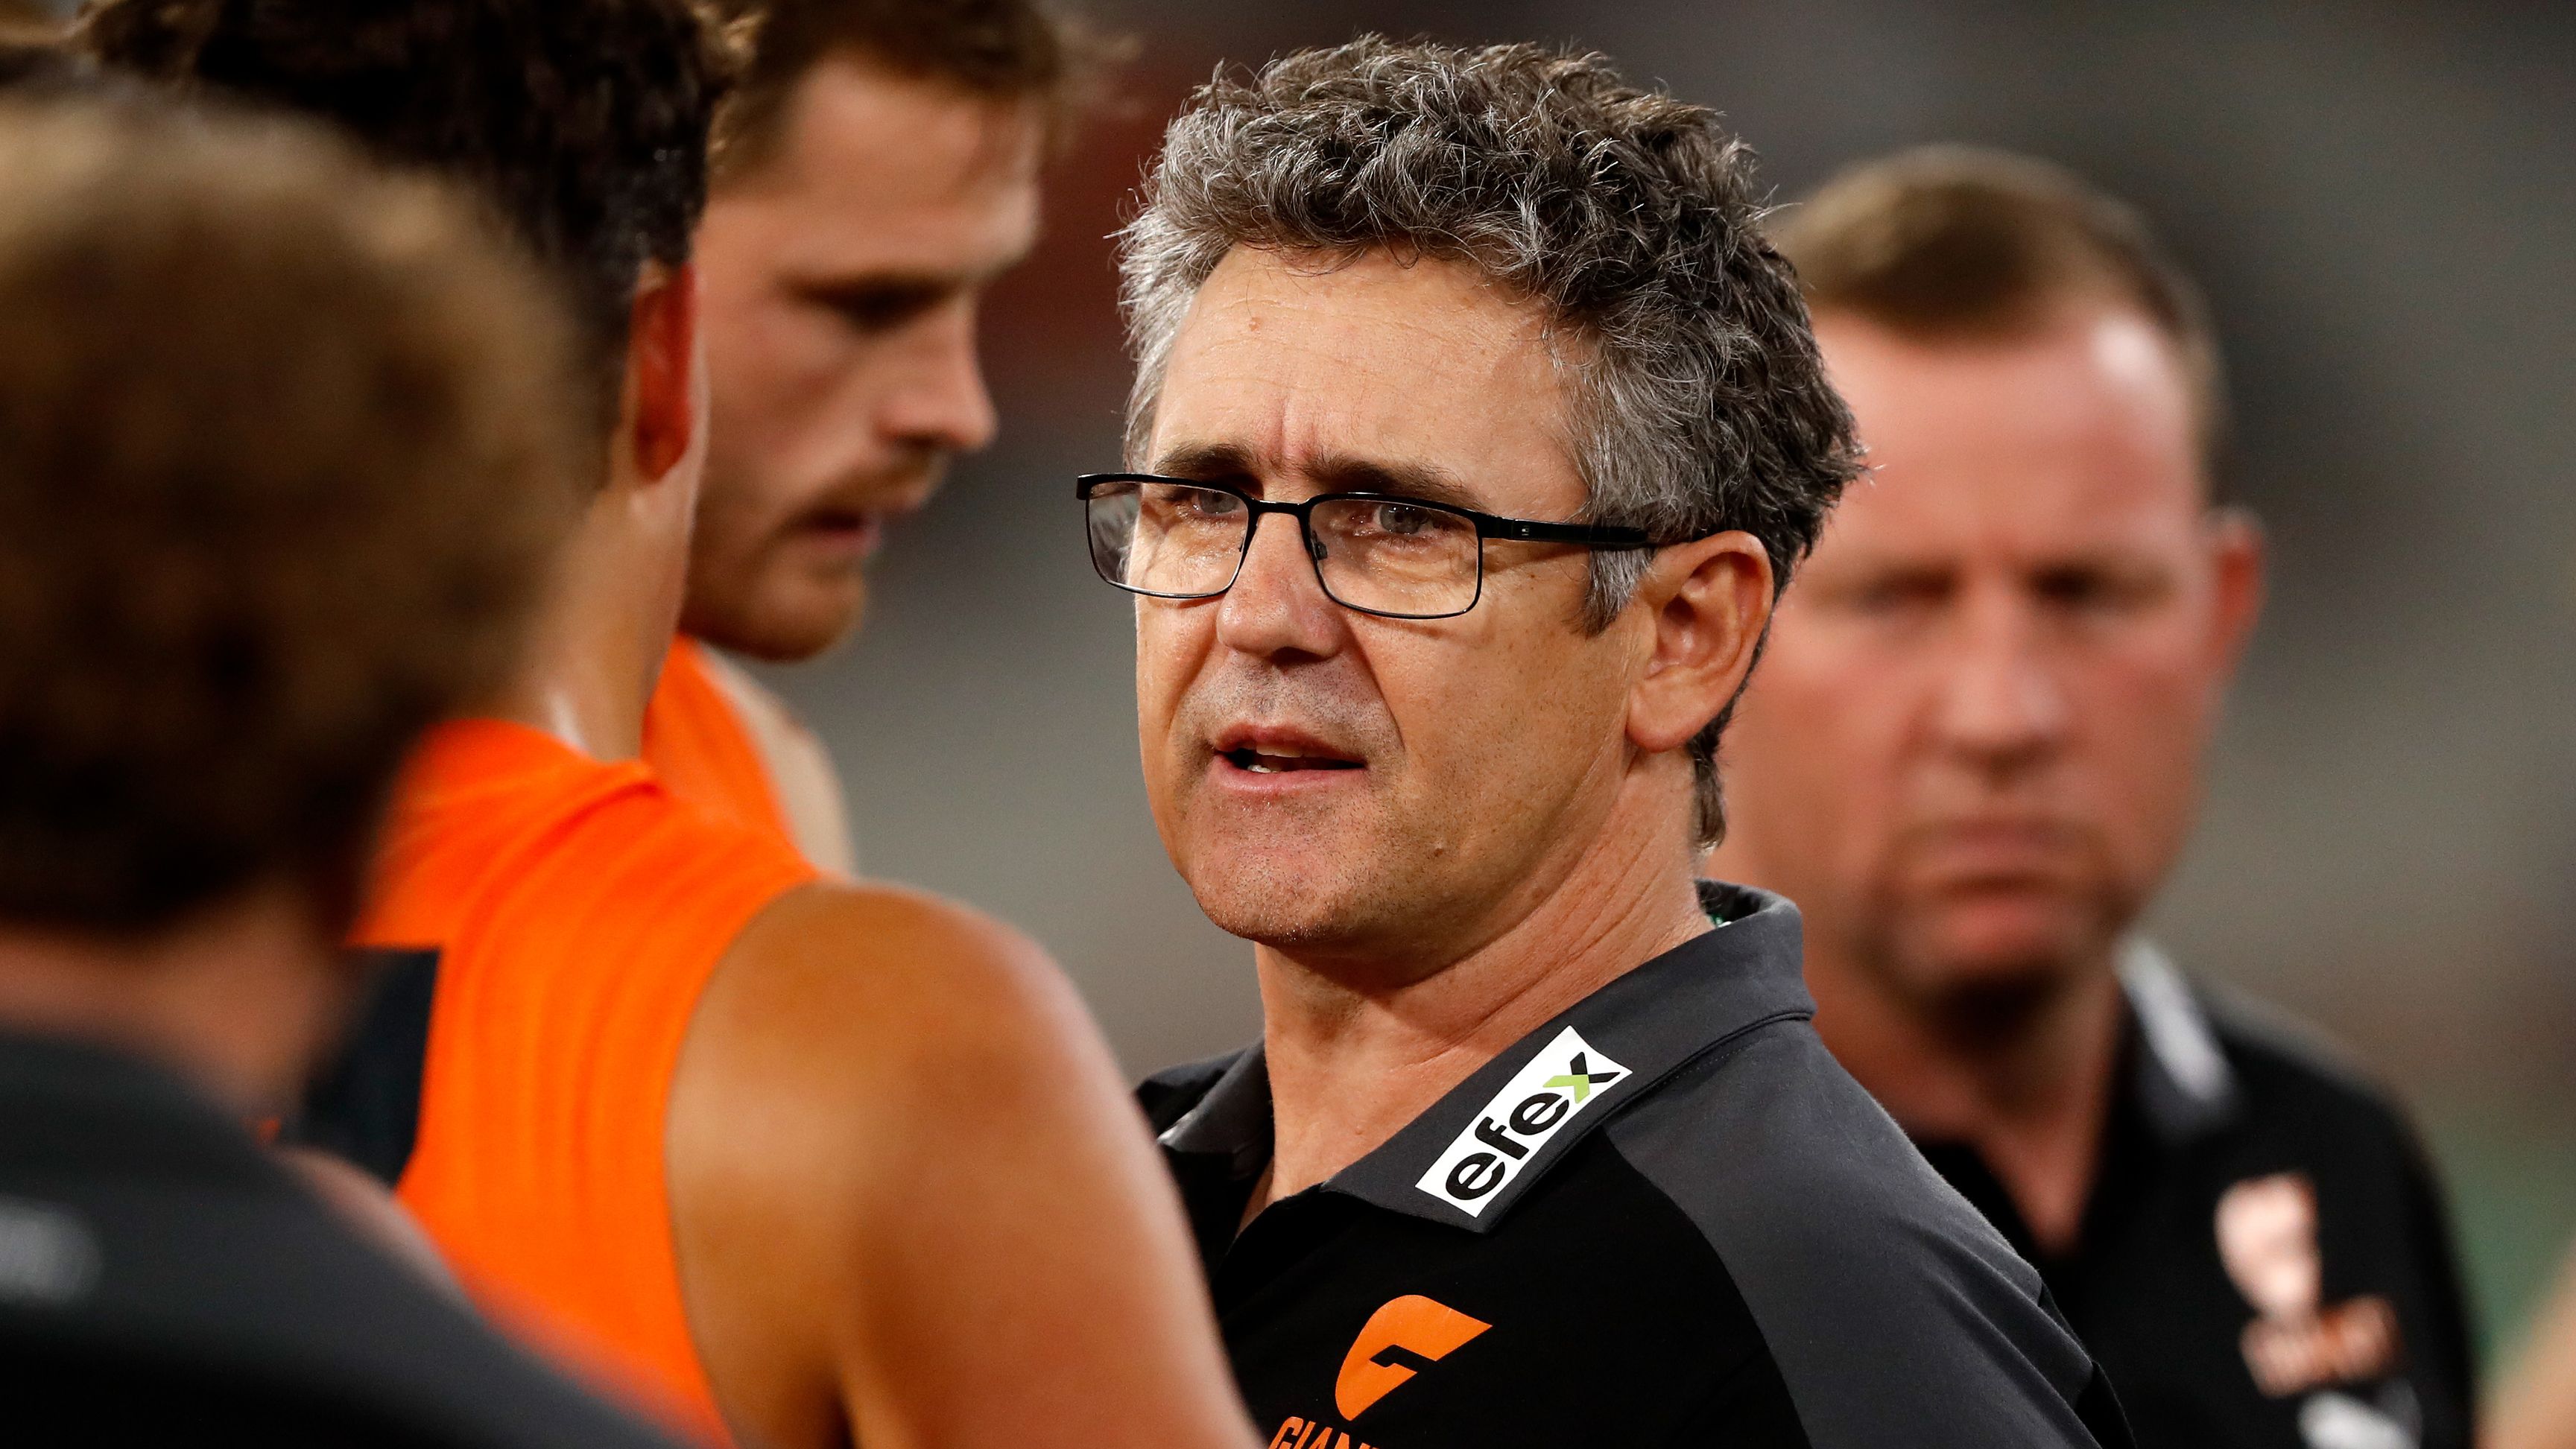 GWS Giants coach Leon Cameron announced he is stepping down on Thursday after more than eight seasons at the helm of the club.